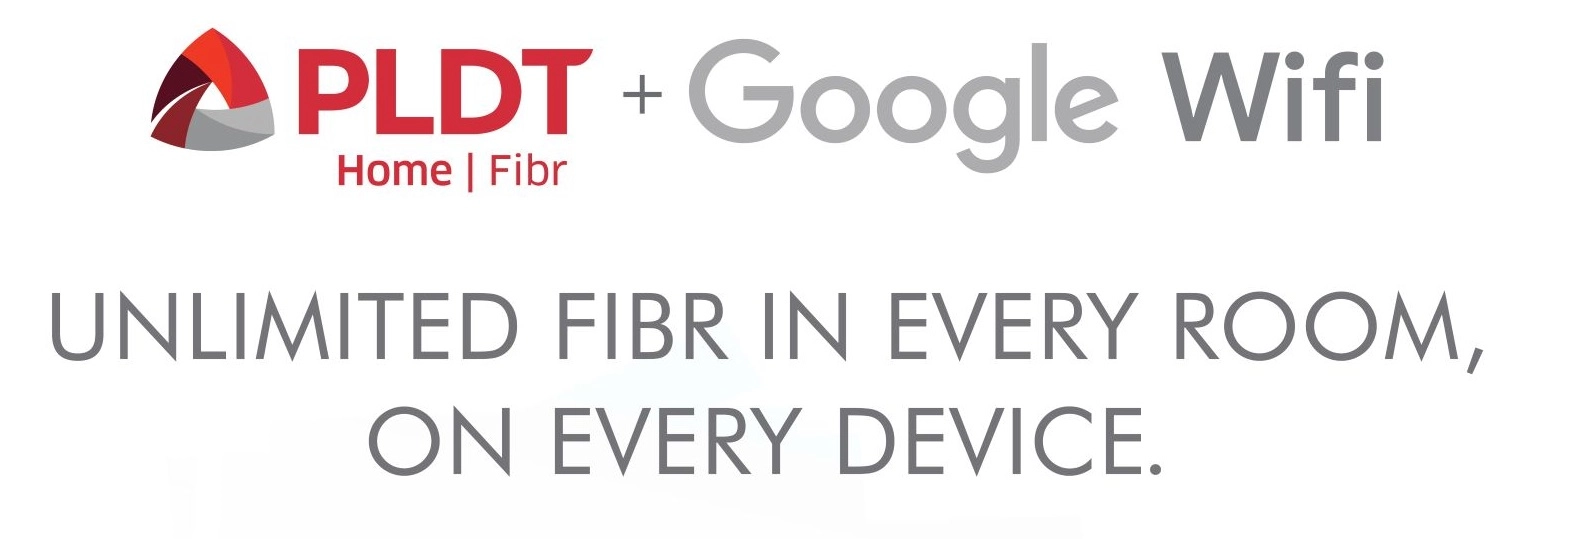 PLDT Launches All-New Google Wi-Fi Plans!